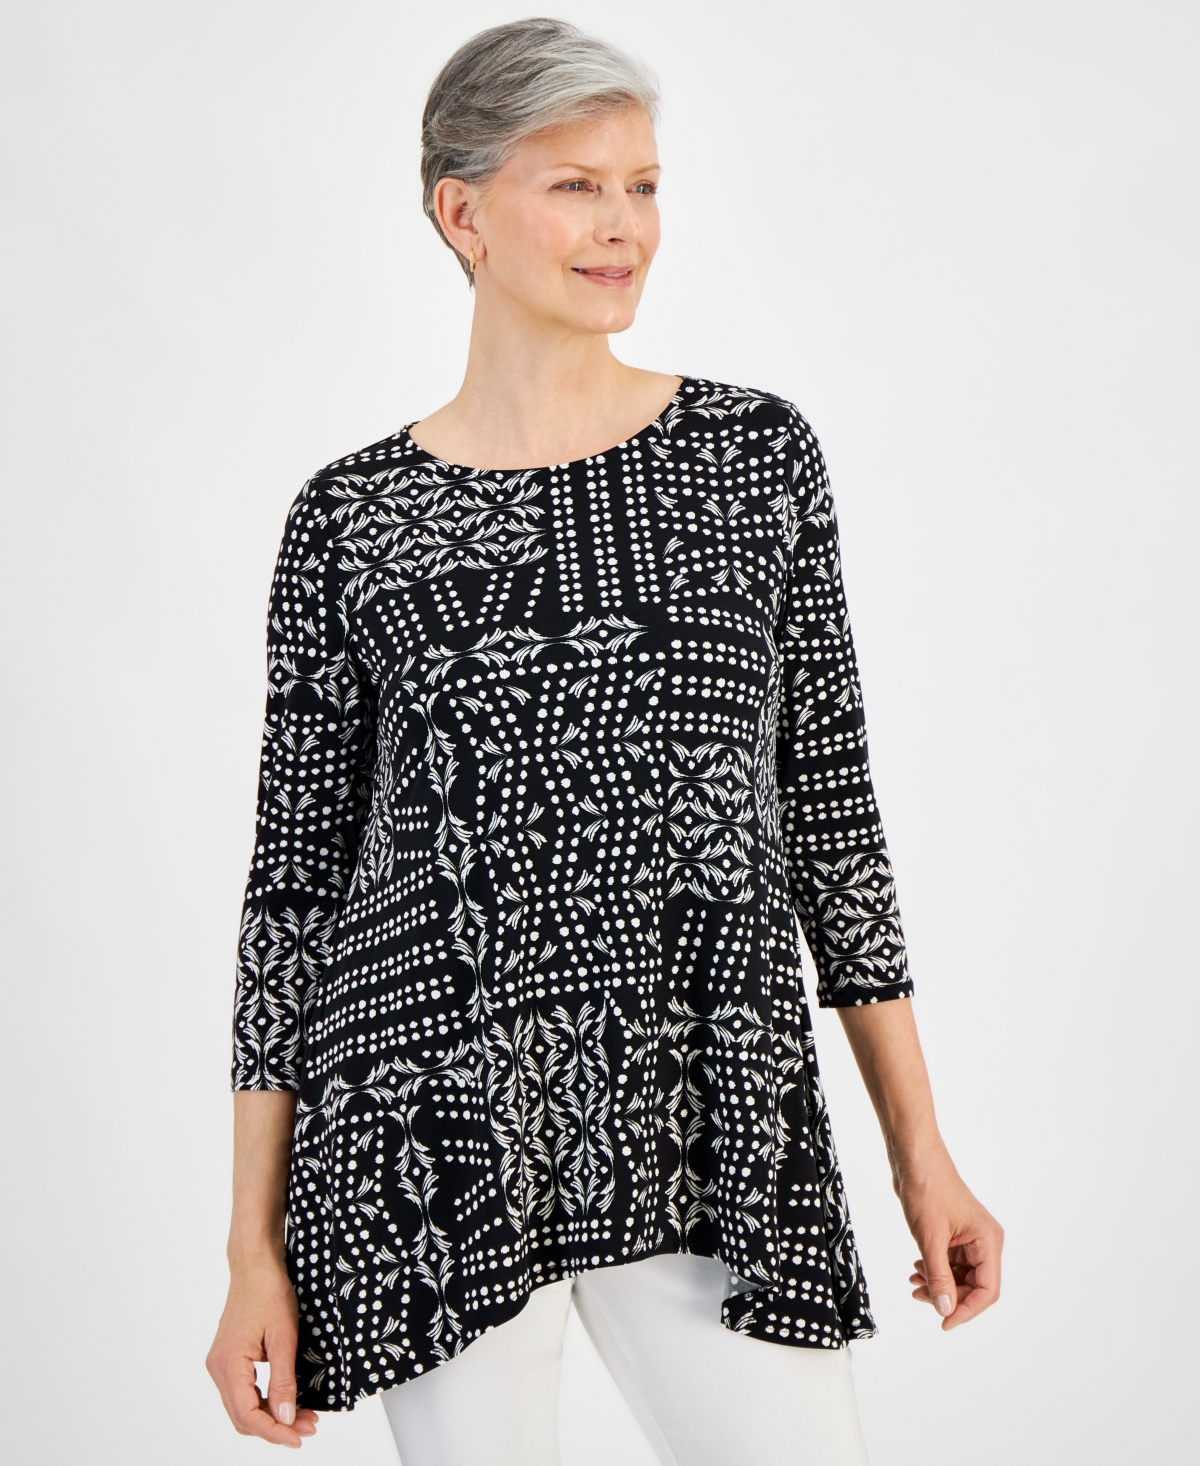 Women's 3/4 Sleeve Printed Jacquard Top, Created for Macy's - Stone Combo